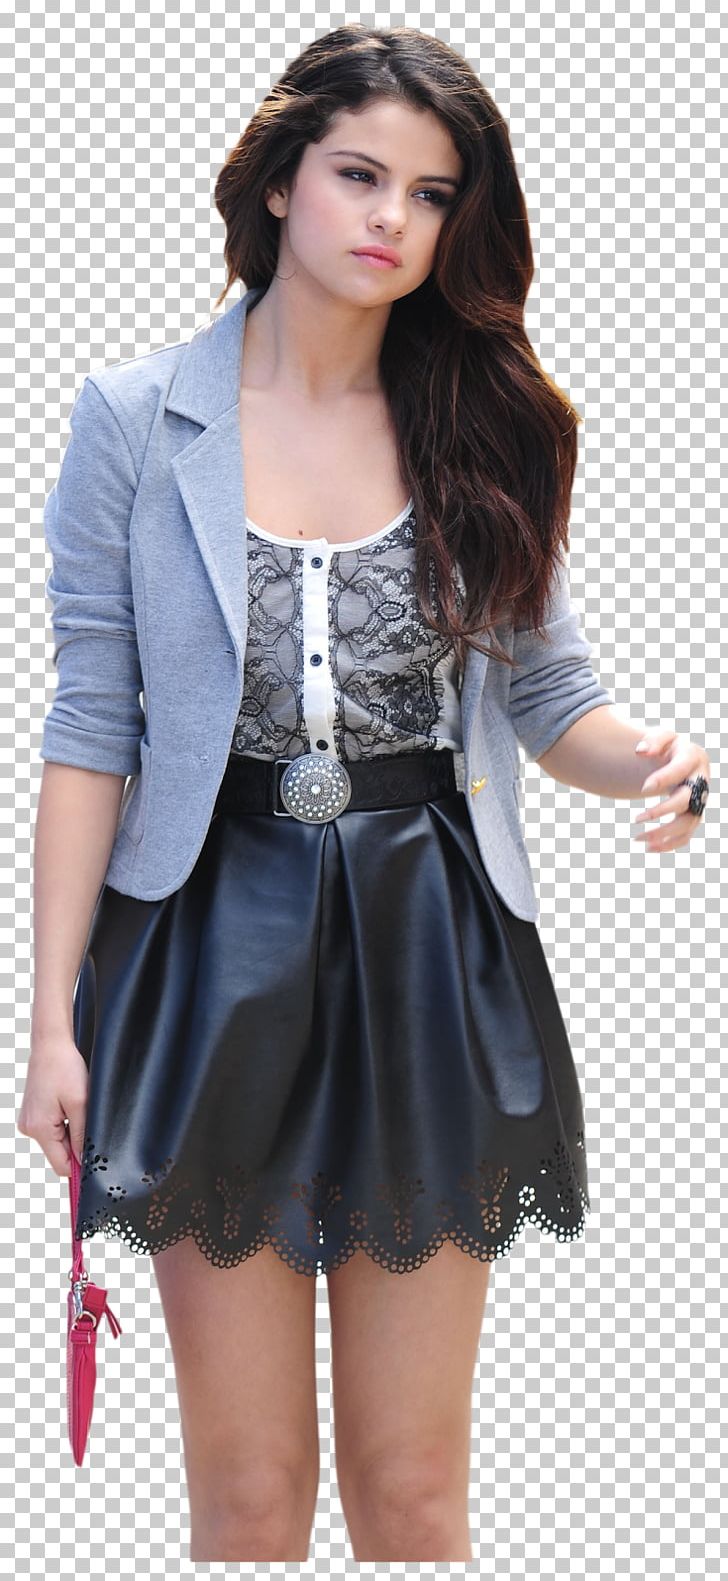 Dream Out Loud By Selena Gomez Black And White PNG, Clipart, Black, Black And White, Clothing, Costume, Dream Out Loud By Selena Gomez Free PNG Download